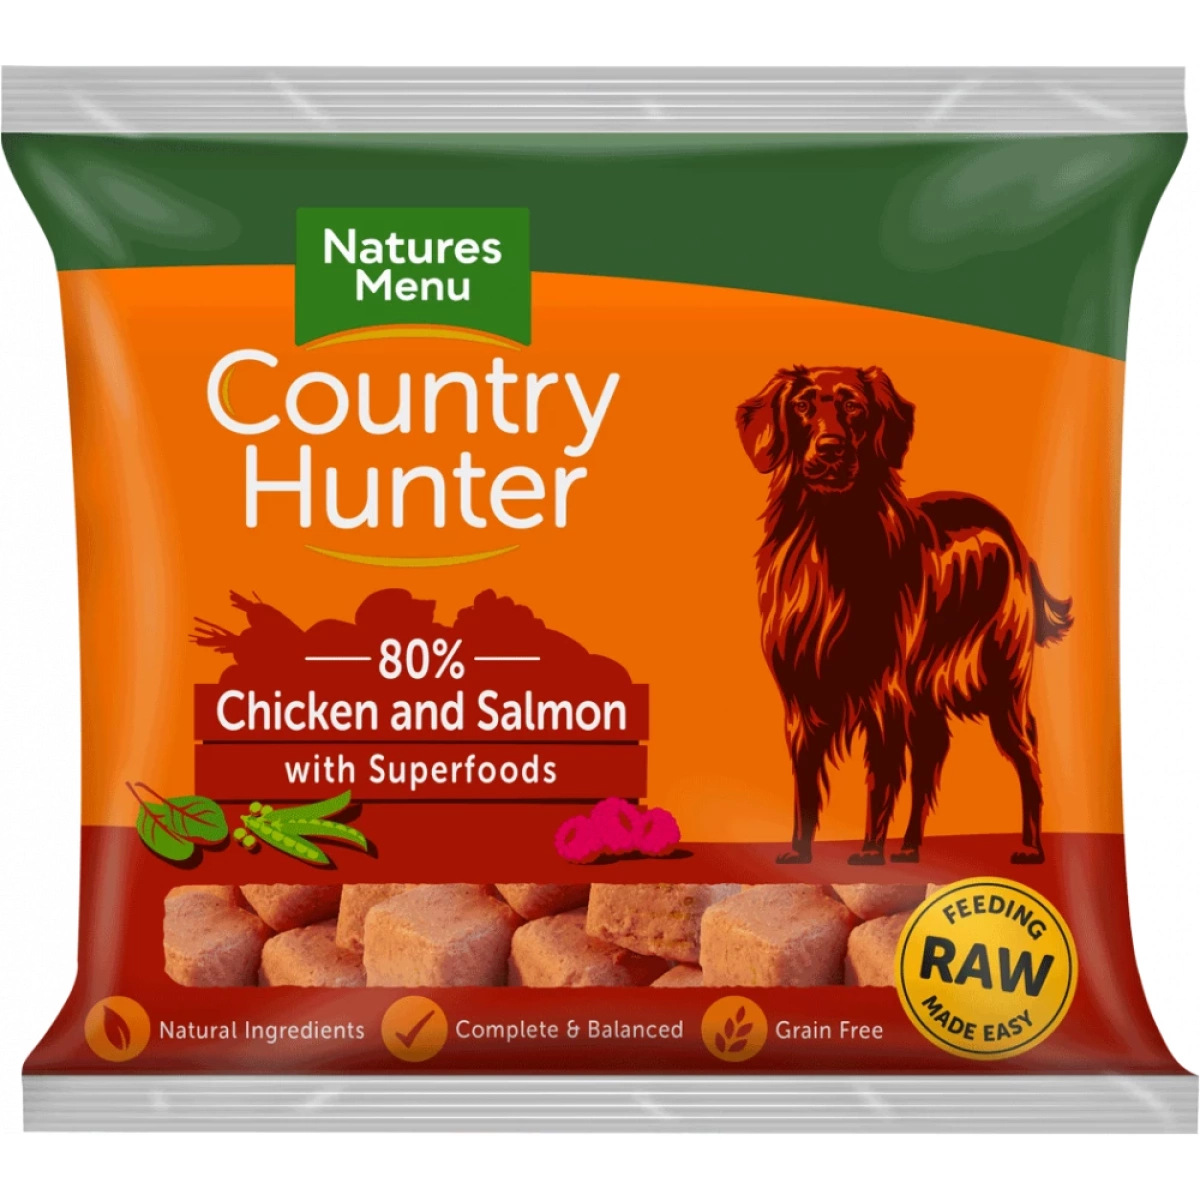 Country Hunter Nuggets 1kg - Chicken & Salmon Main Image